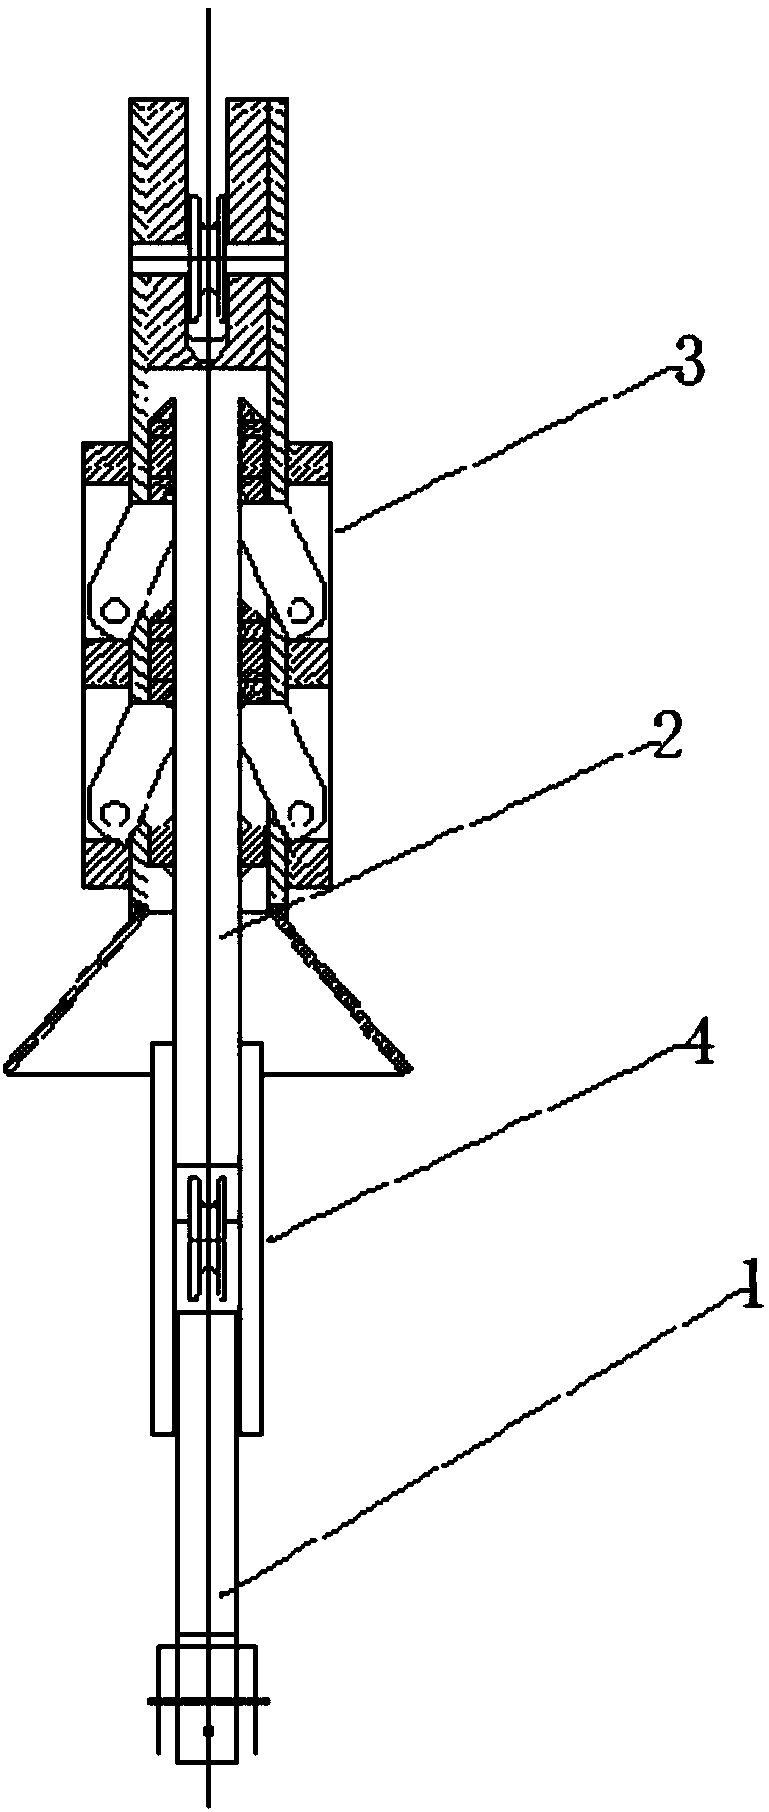 Hammer head salvage connection structure and hammer head salvage device